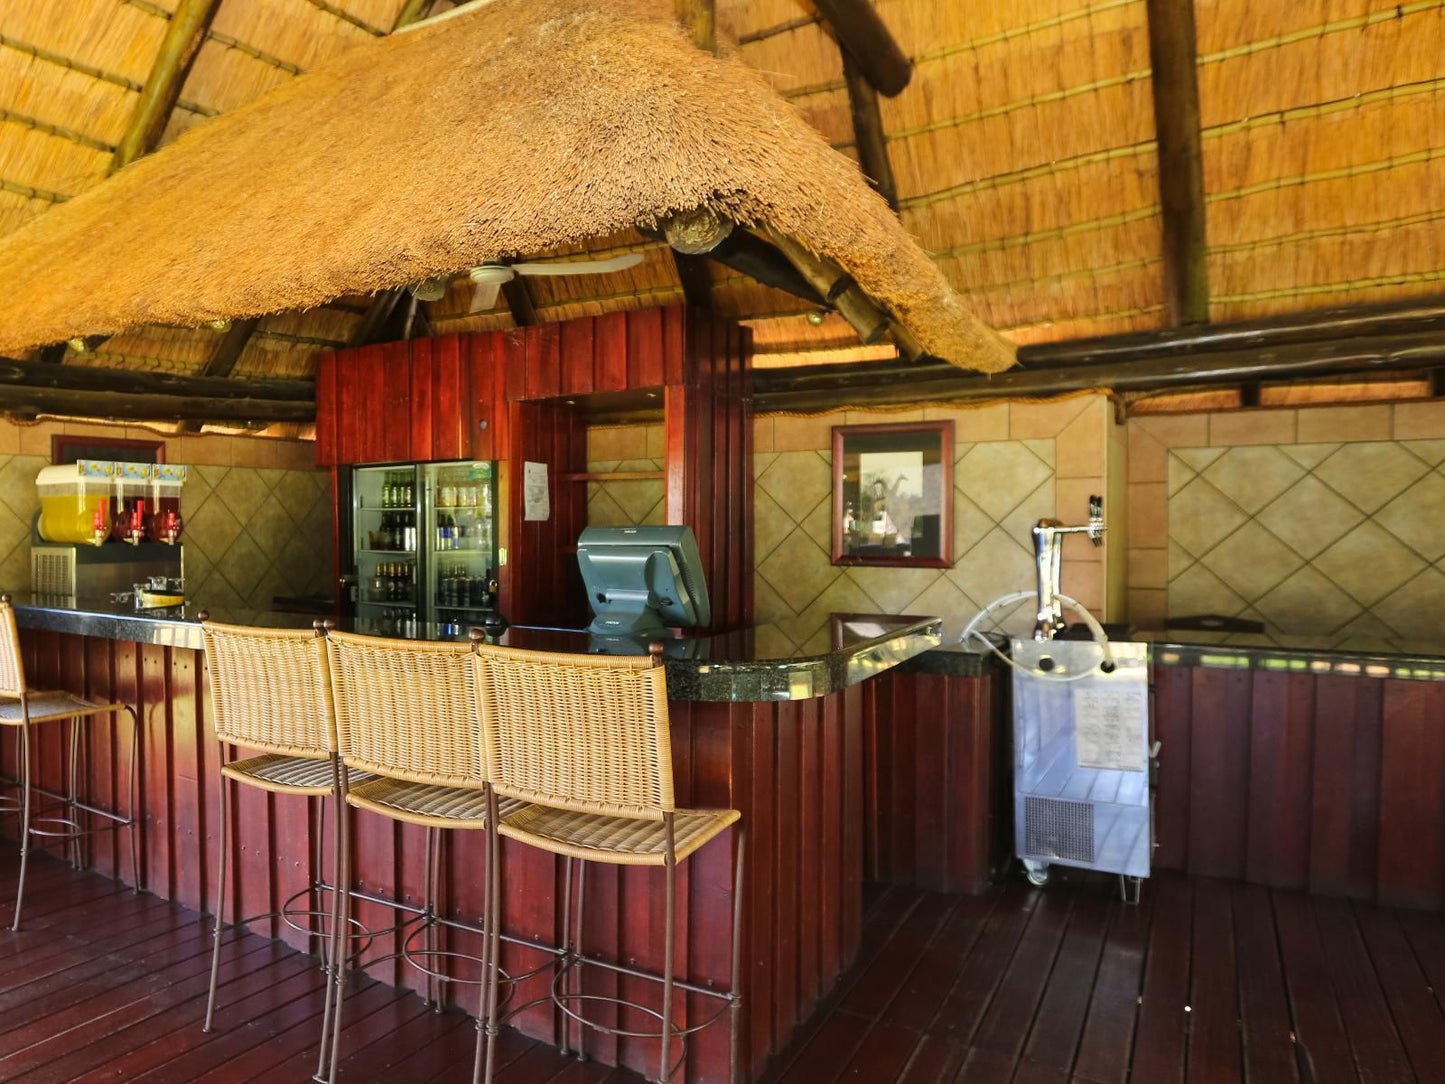 Bakubung Self Catering Chalets Pilanesberg Game Reserve North West Province South Africa Colorful, Bar